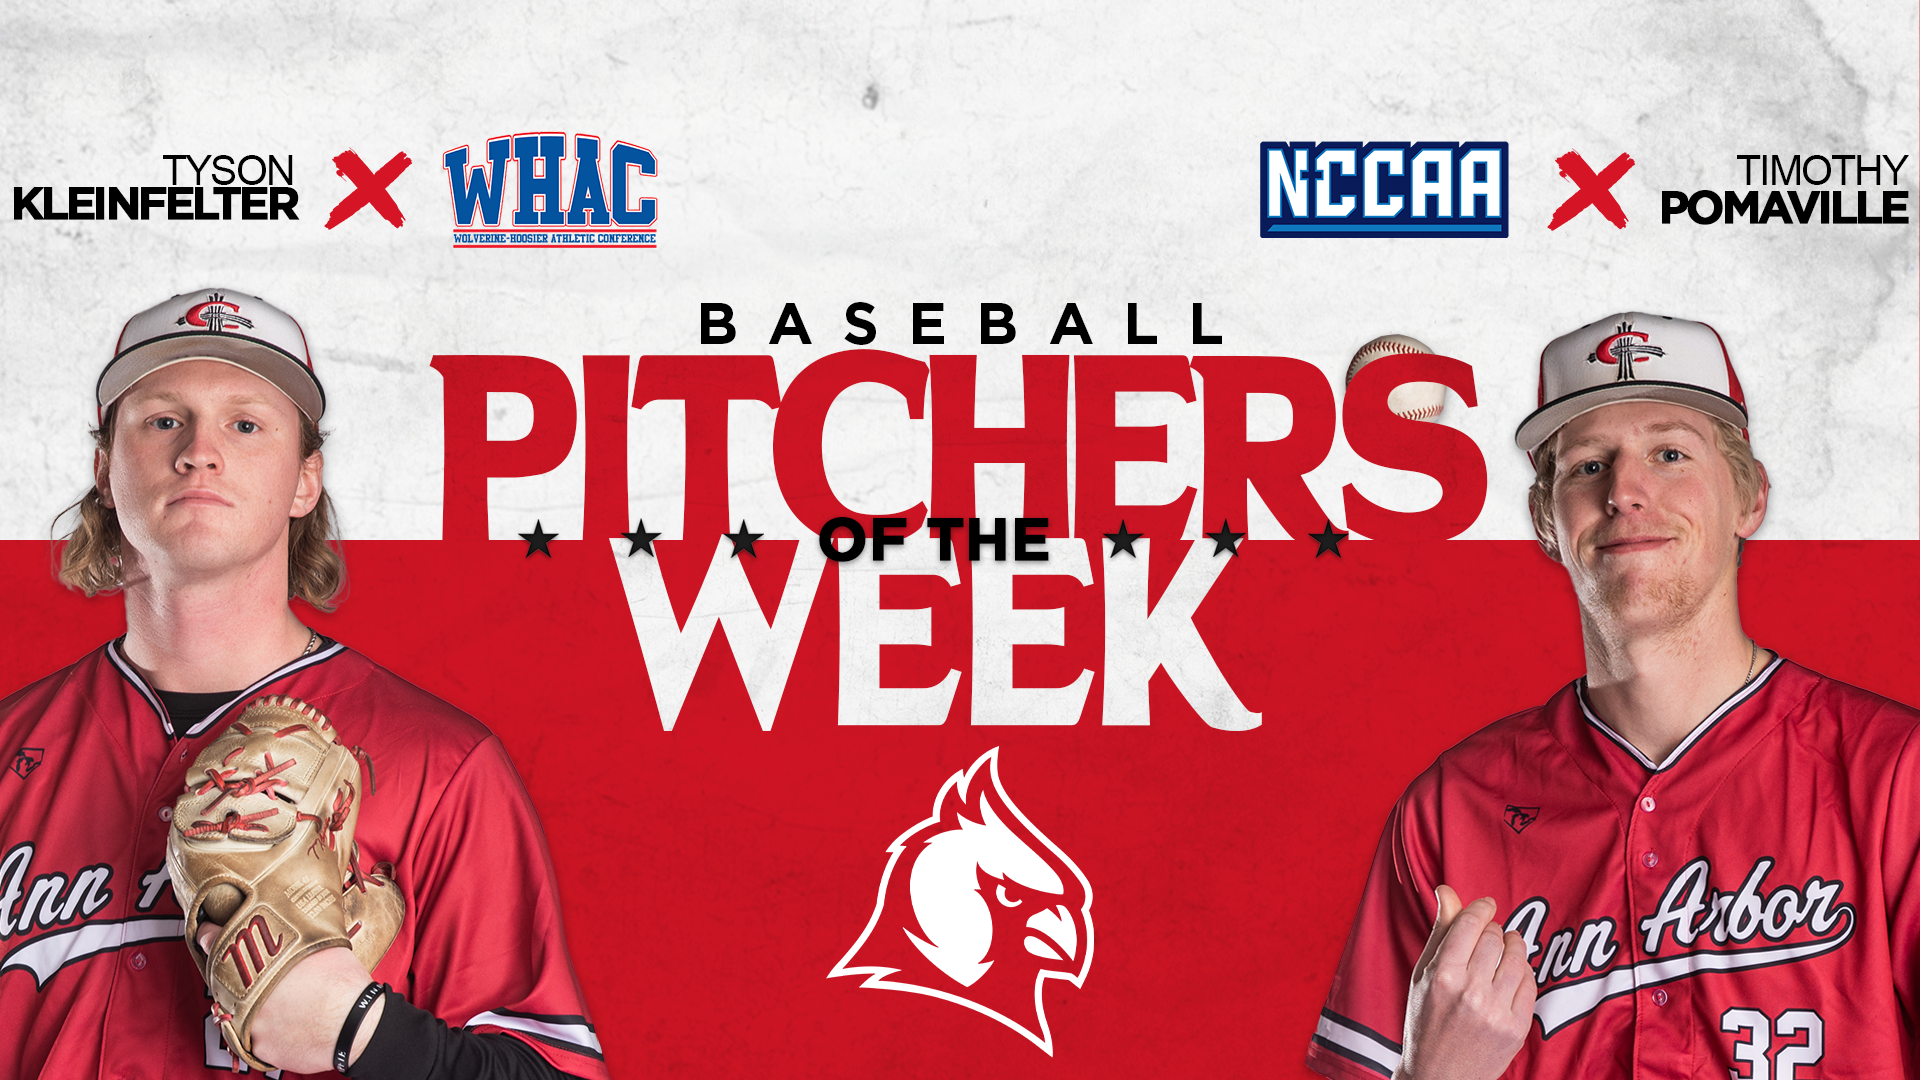 Kleinfelter wins WHAC Pitcher of the Week; Pomaville named NCCAA Pitcher of the Week